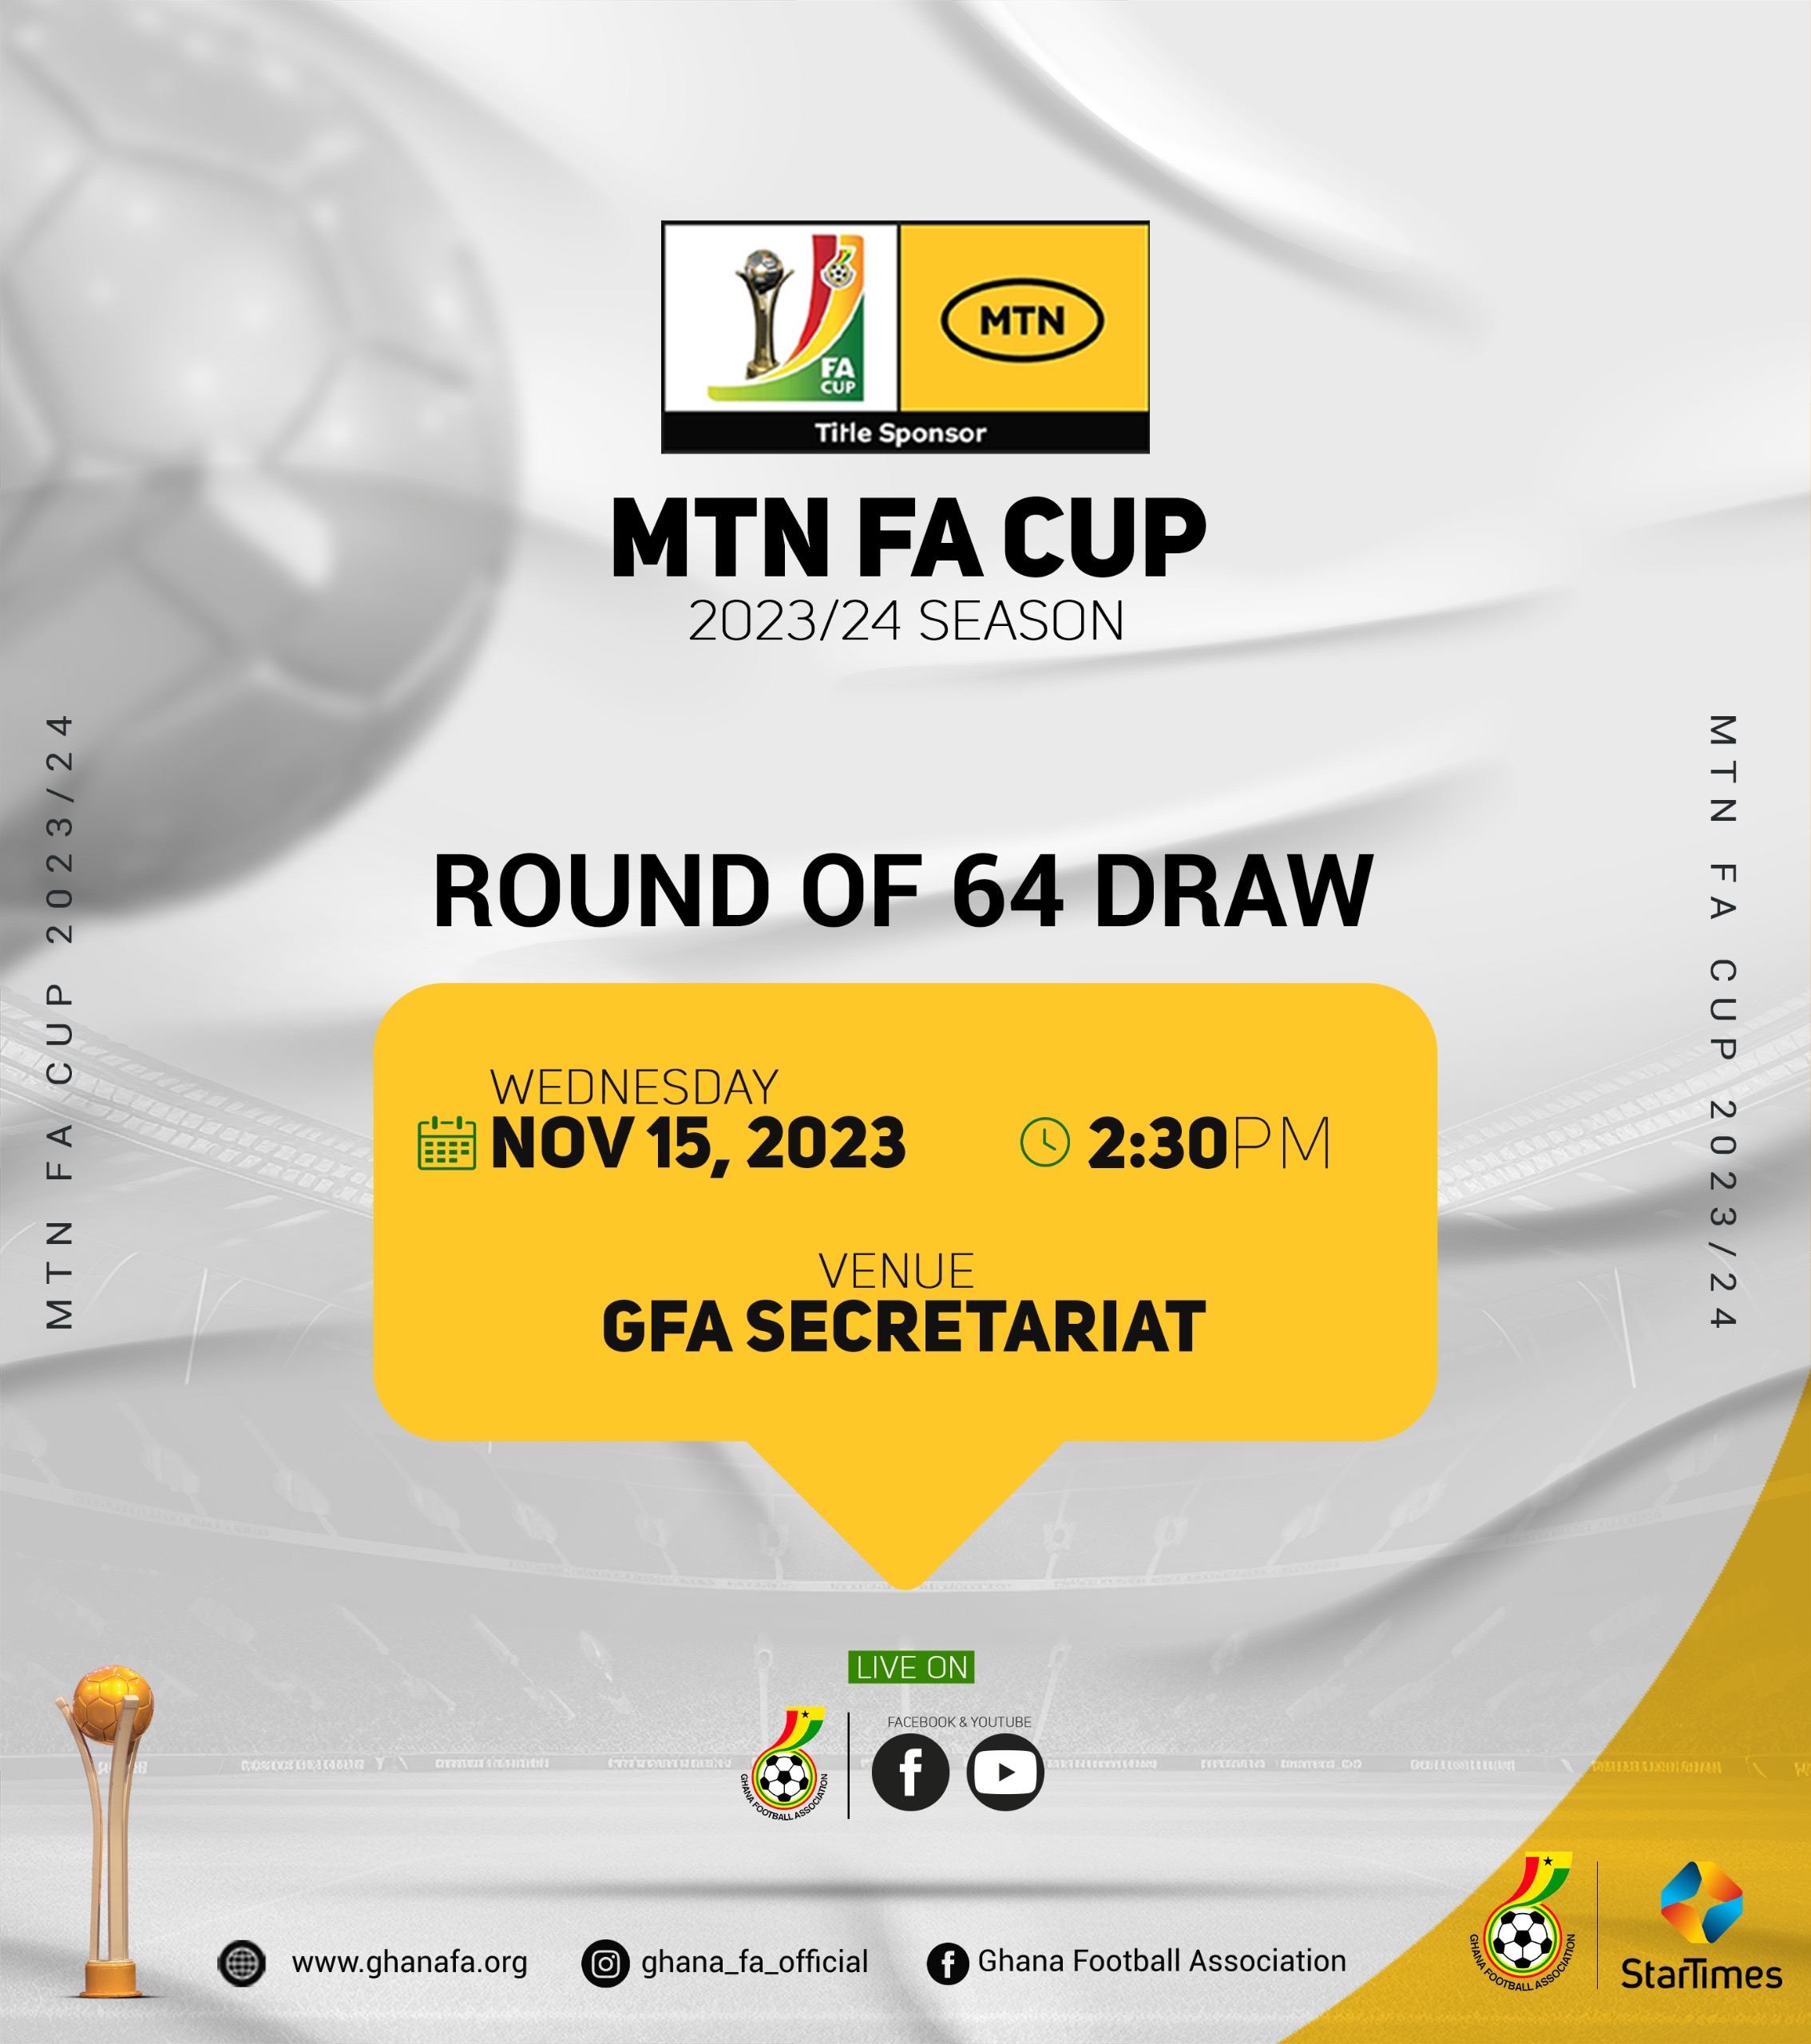 Big Boys join the fray for MTN FA Cup Round of 64 draw on Wednesday